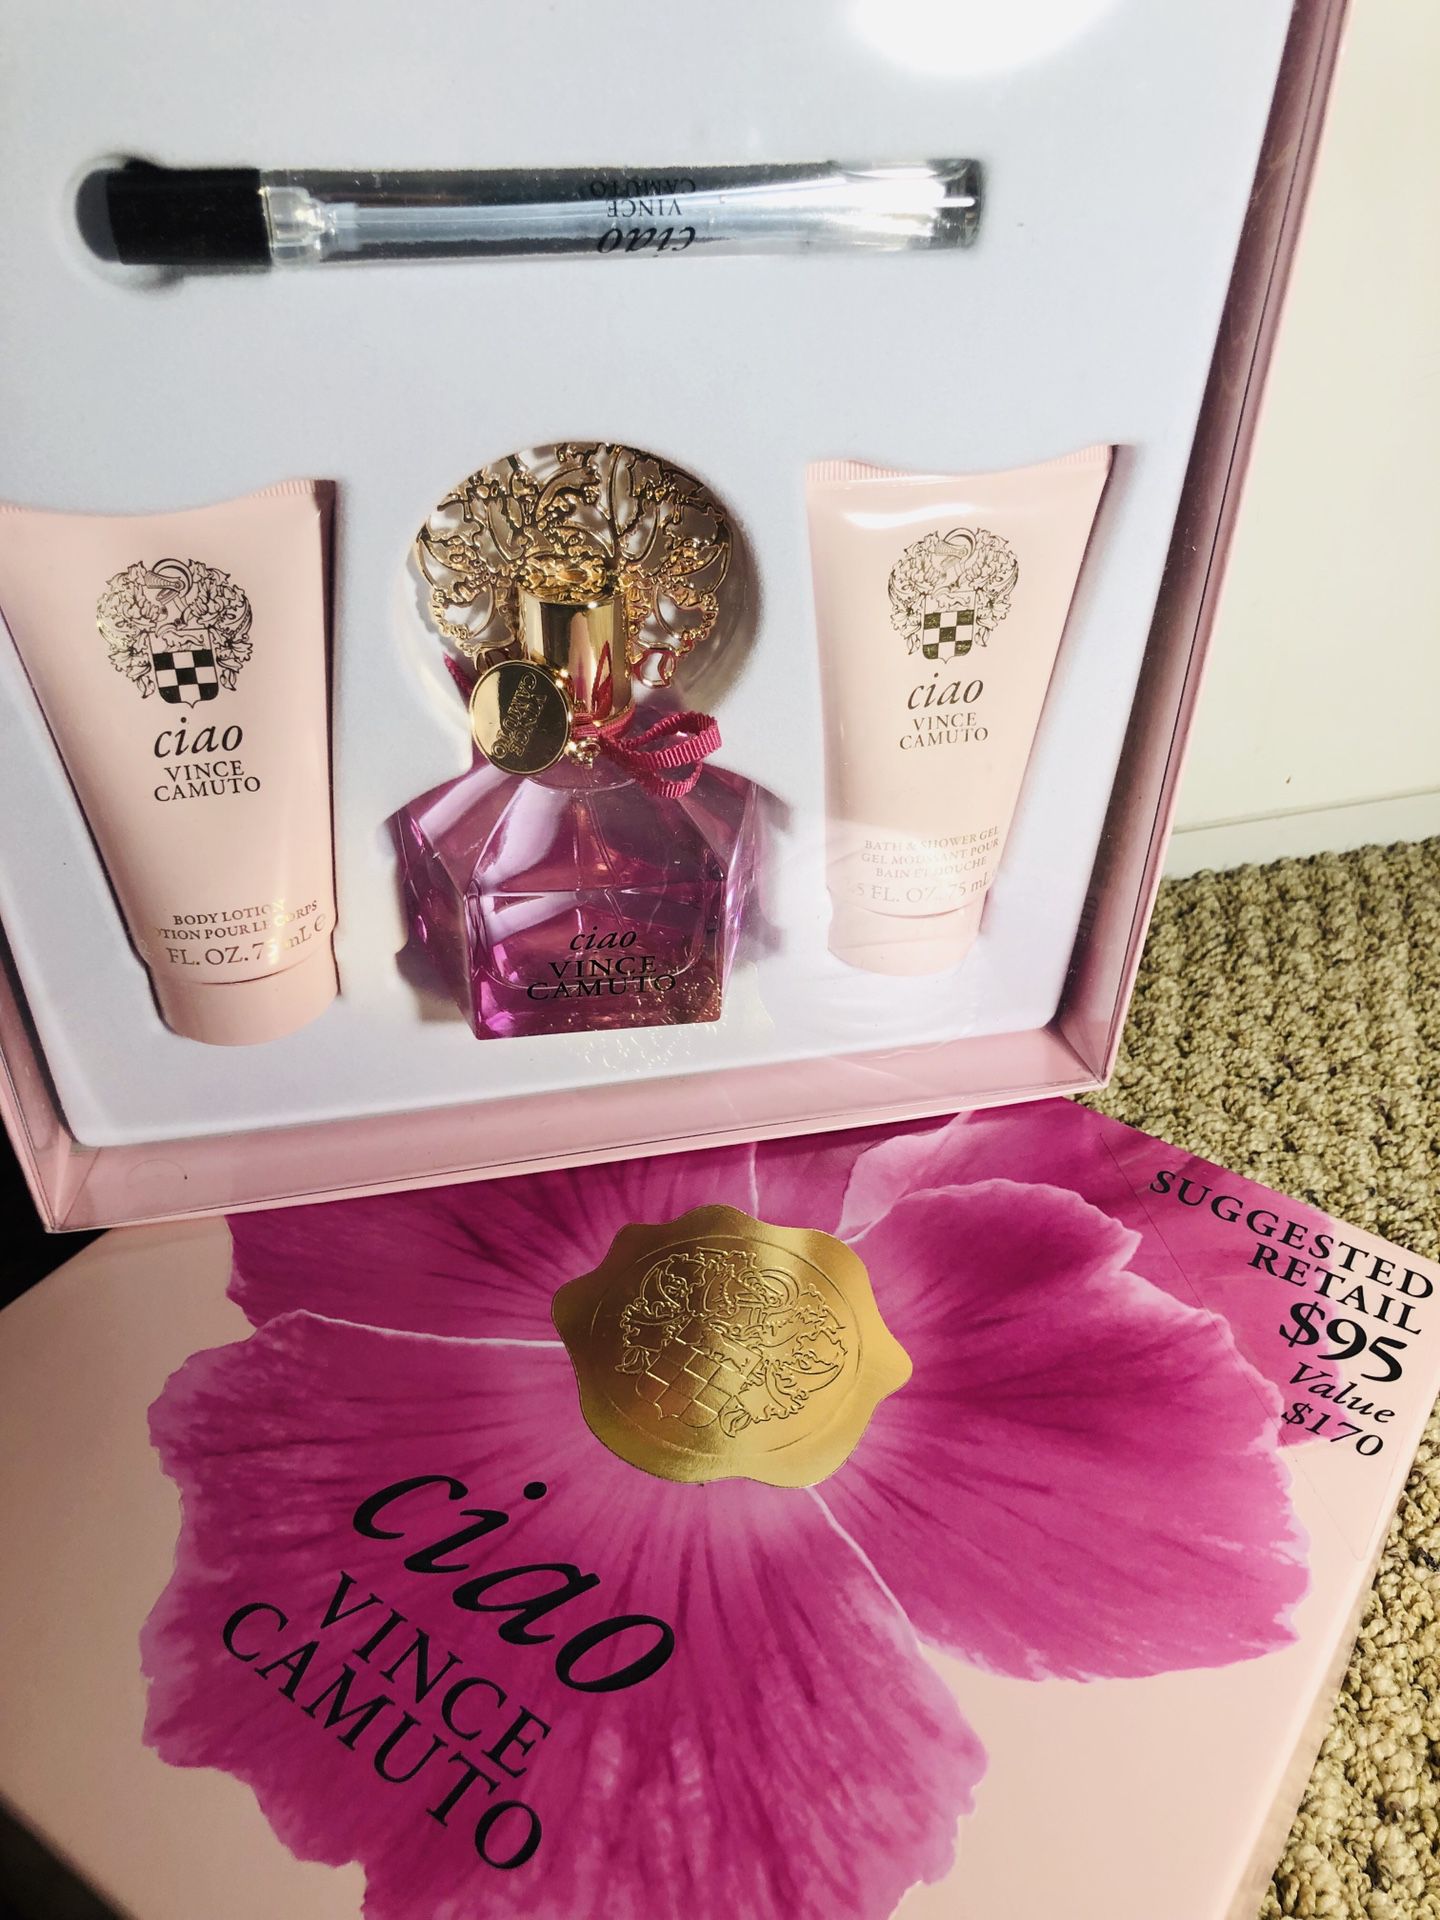 Ciao Vince Camuto perfume sets for Sale in Hillsboro, OR - OfferUp